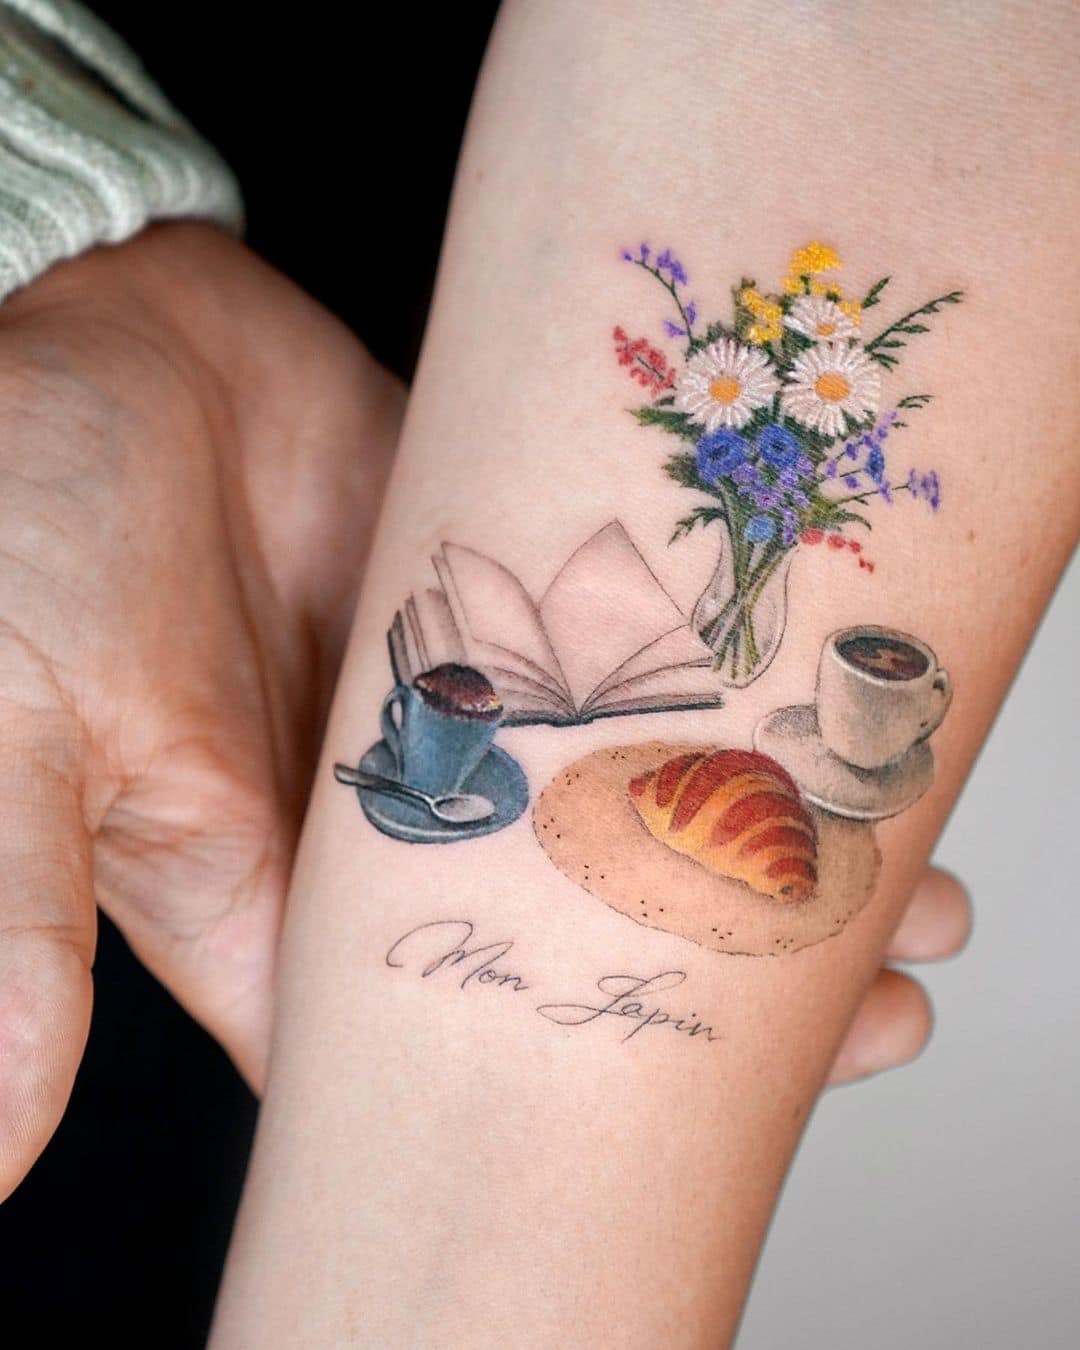 Inking Food on Your Body: Epicurean Tattoos Inspired by Your Eating Habits